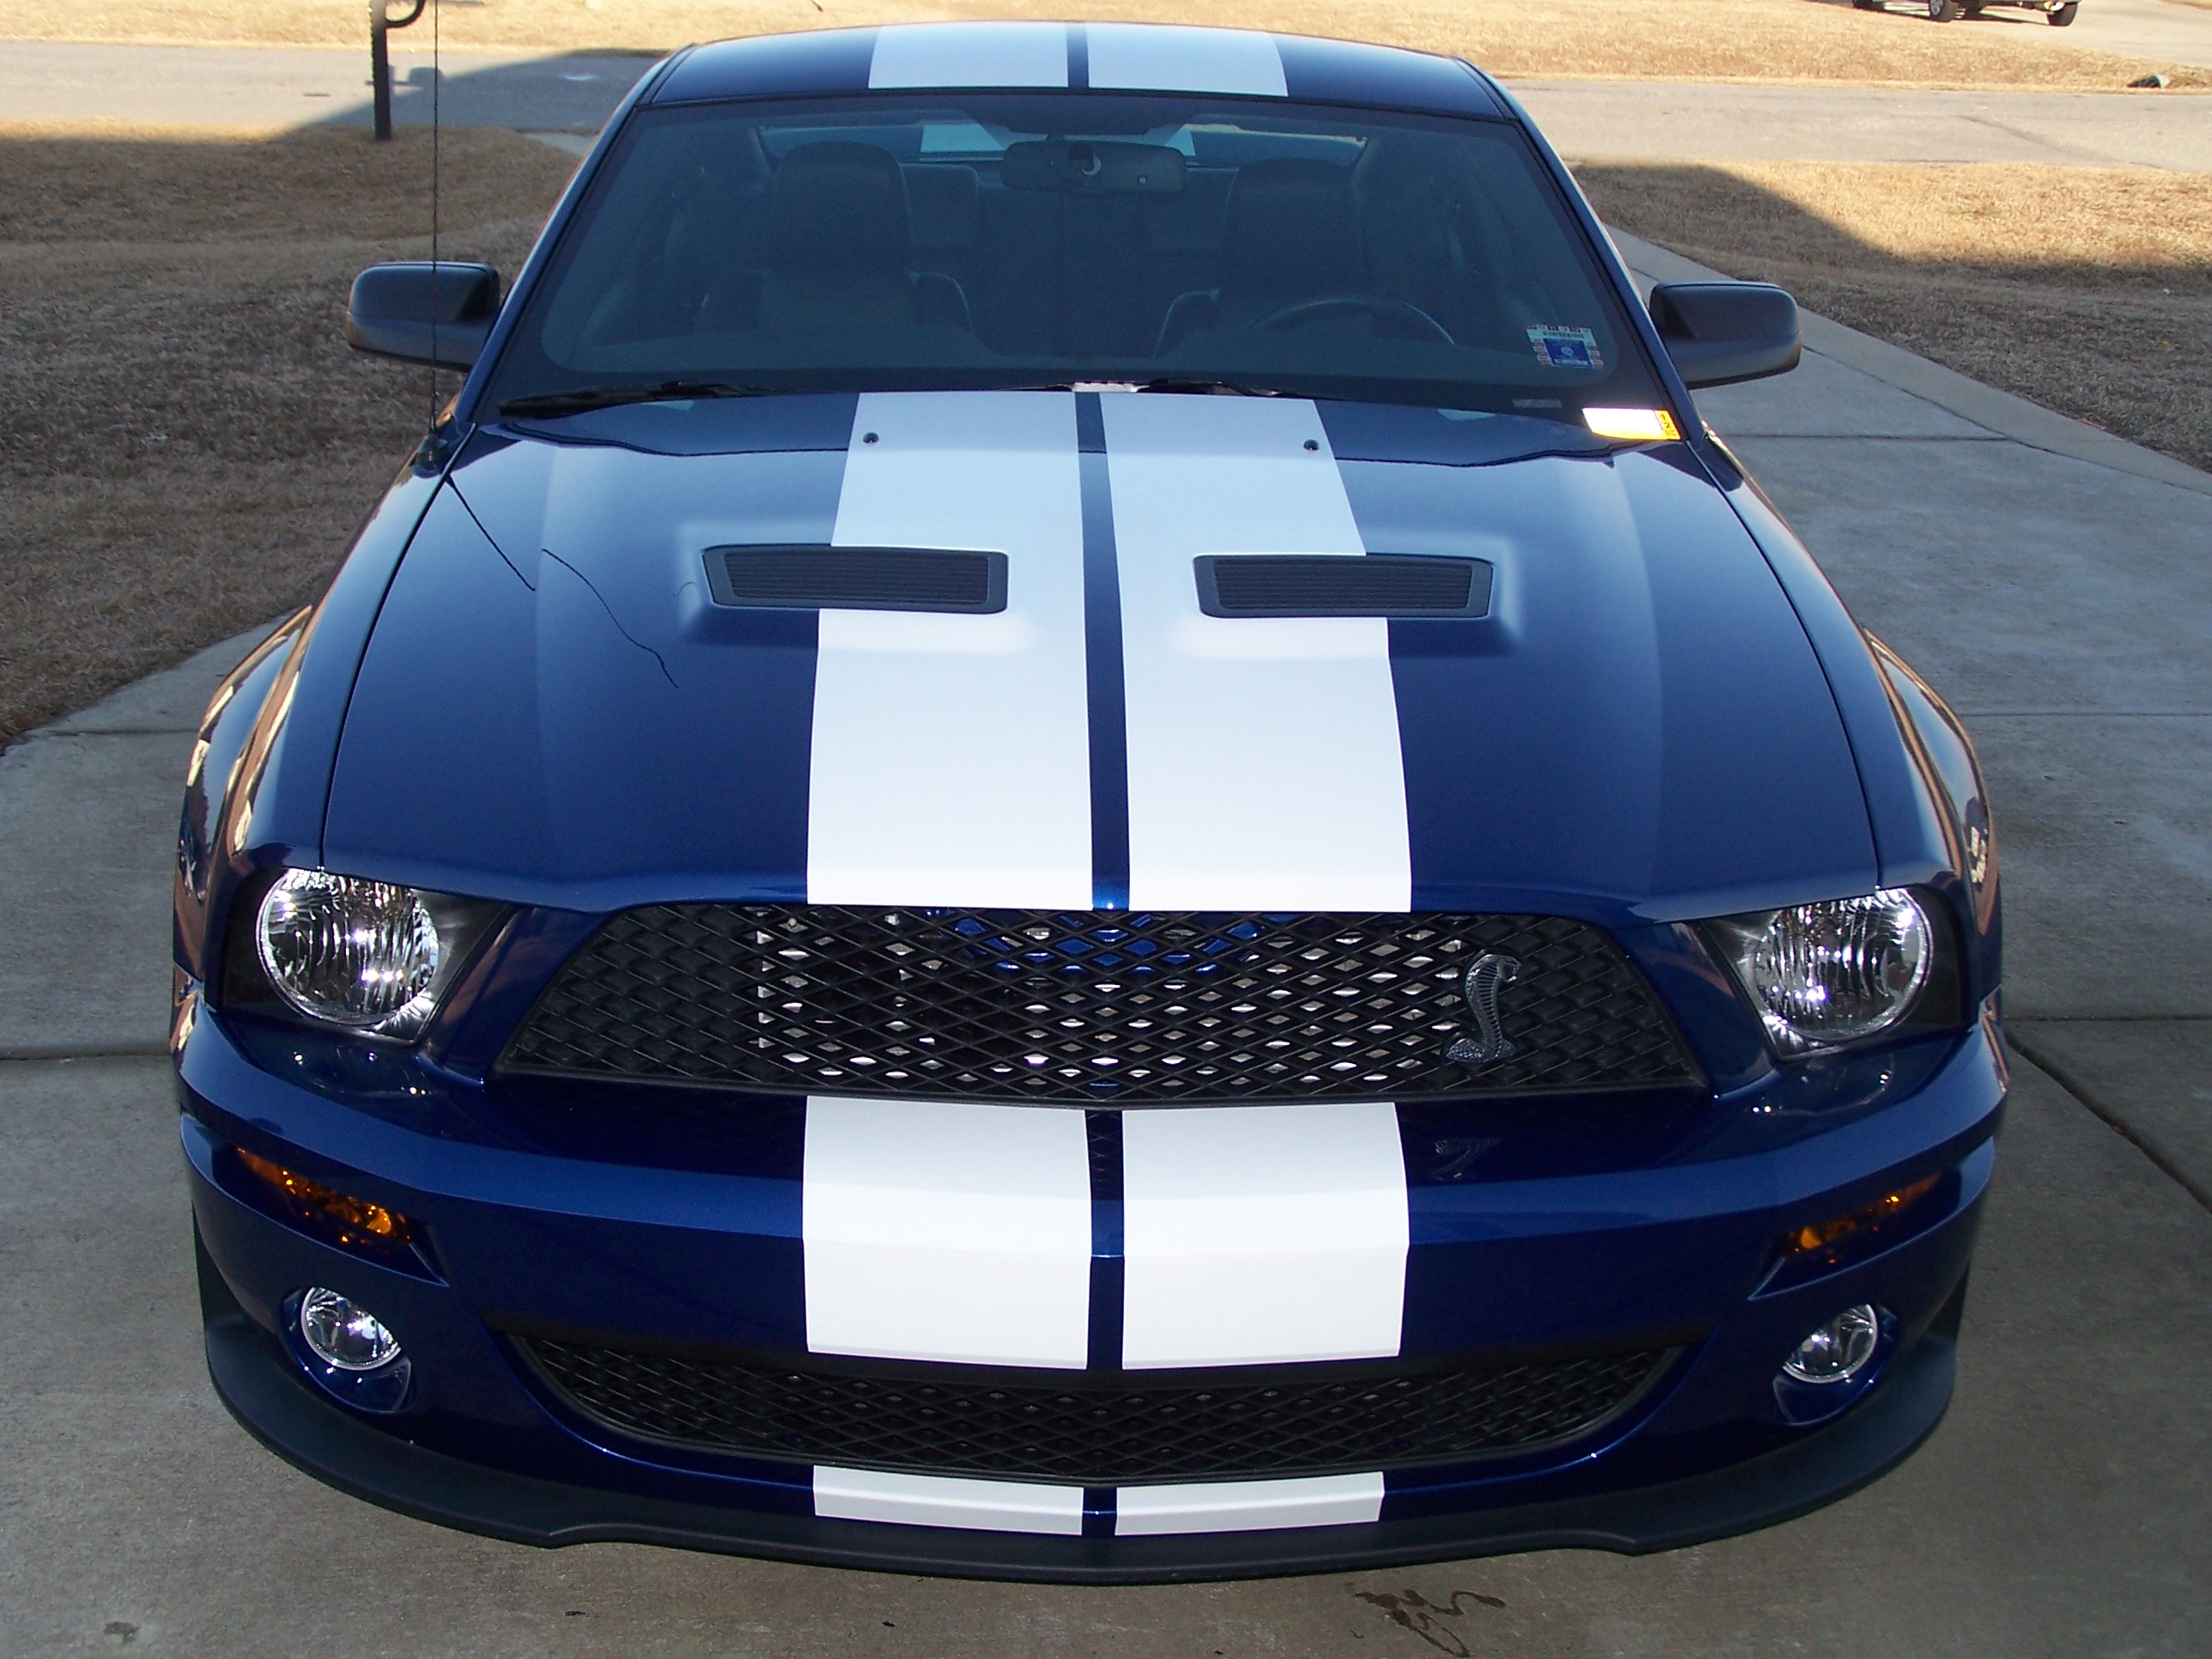  2007 Ford Mustang Shelby-GT500 Coupe